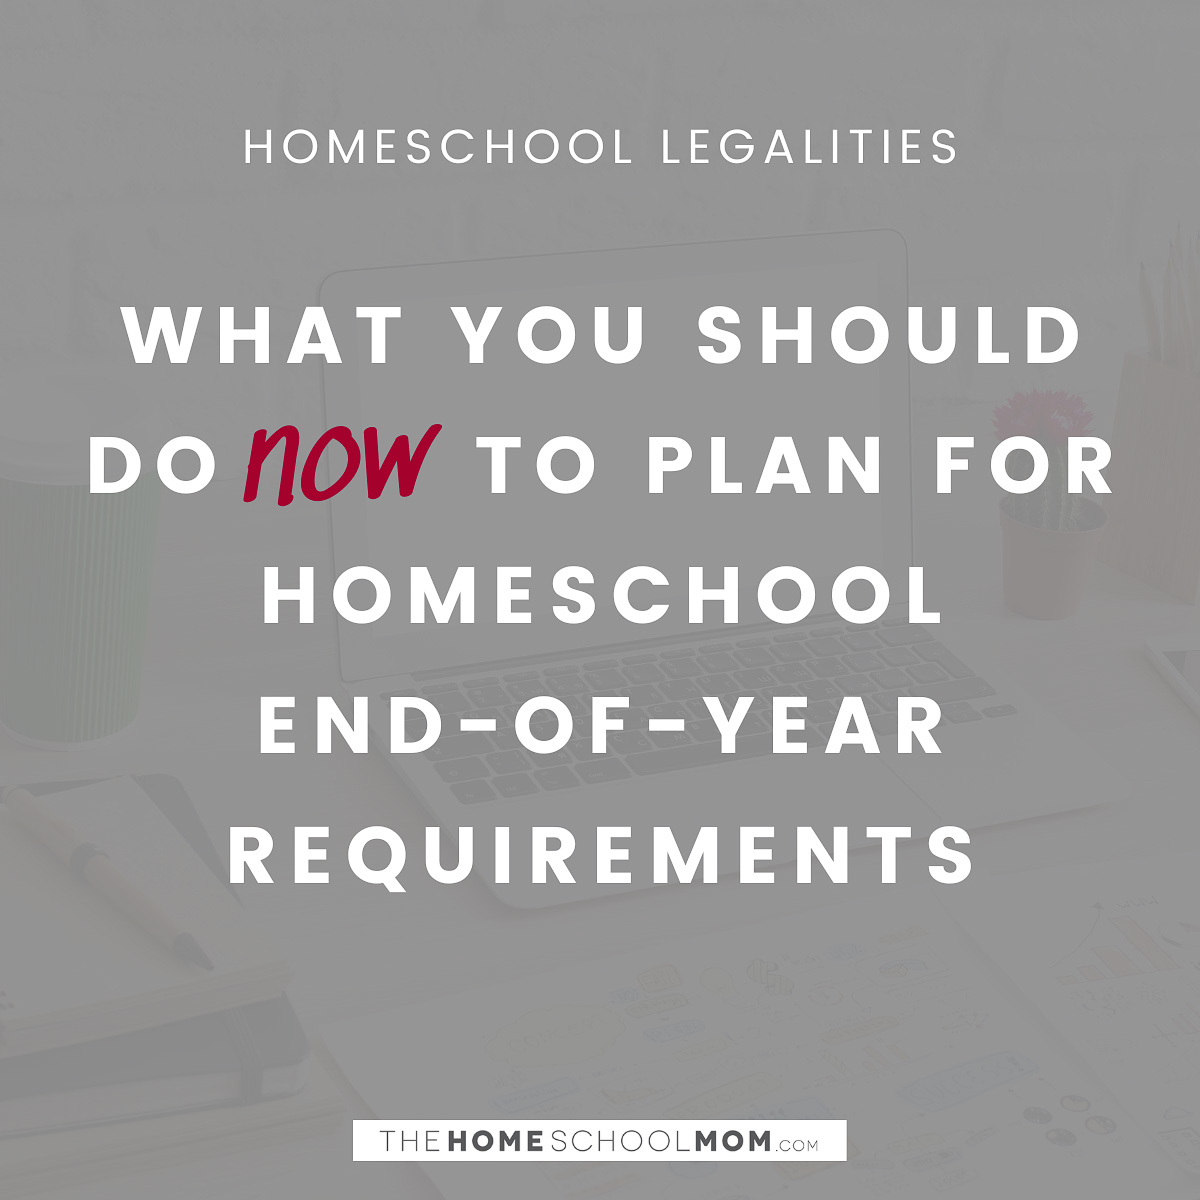 Homeschool Legalities: What you should do now to plan for homeschool end of year requirements